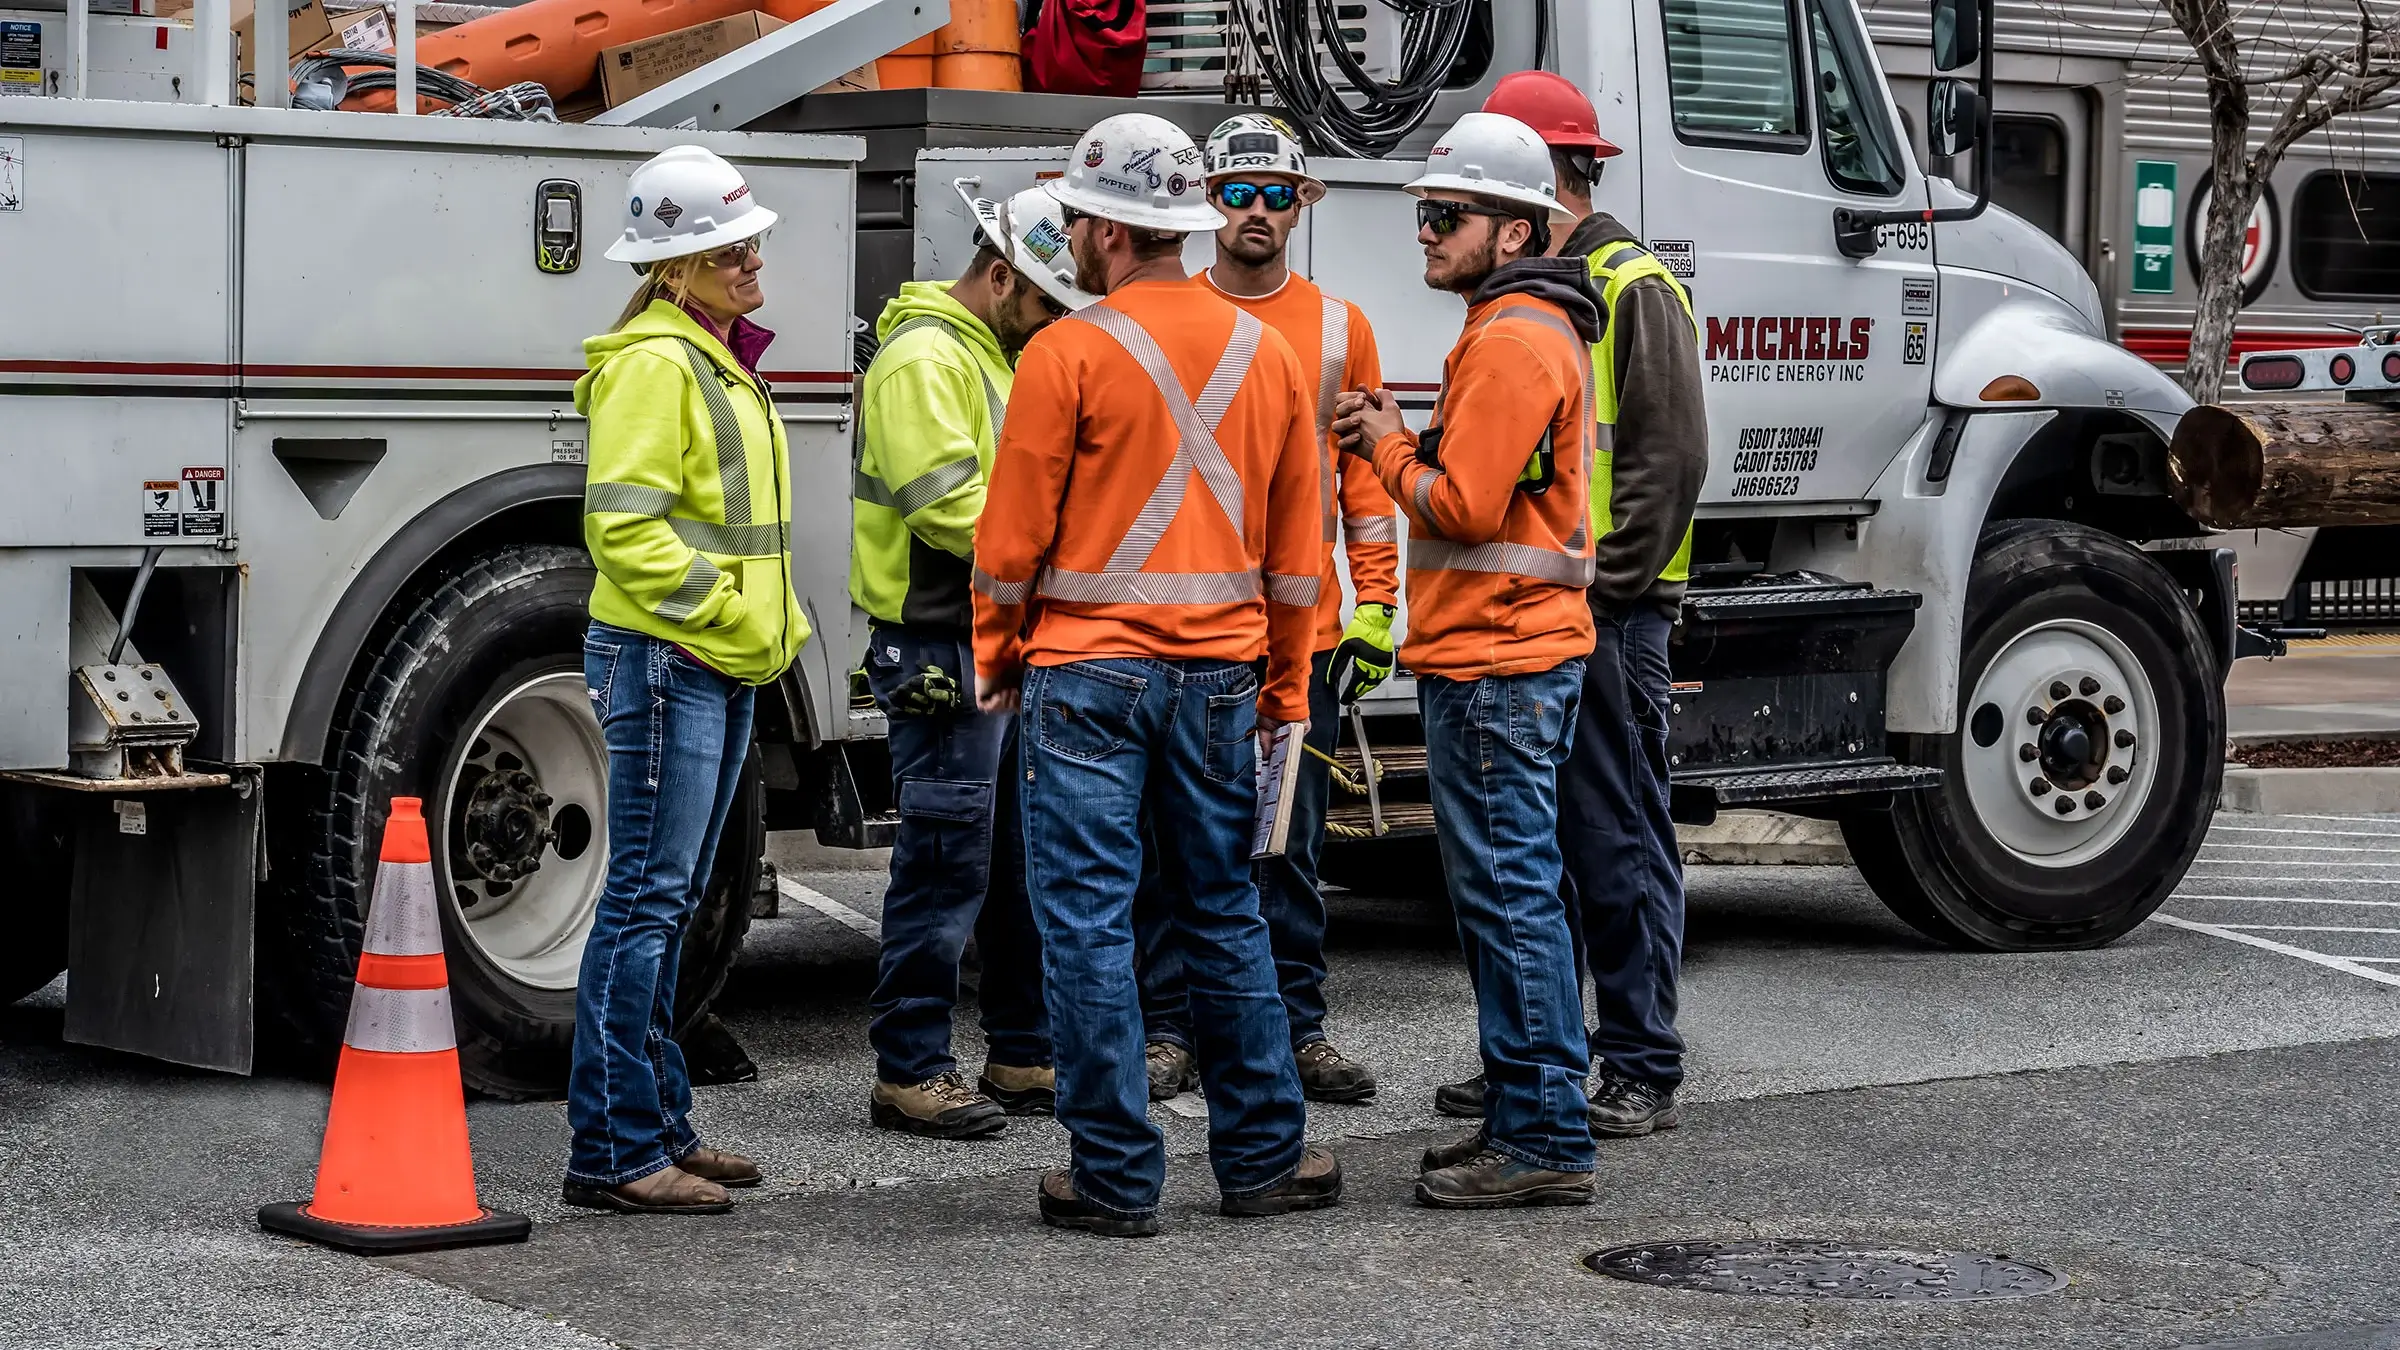 Group of workers wearing safety equipment standing in front of a bucket truck discussing a project.